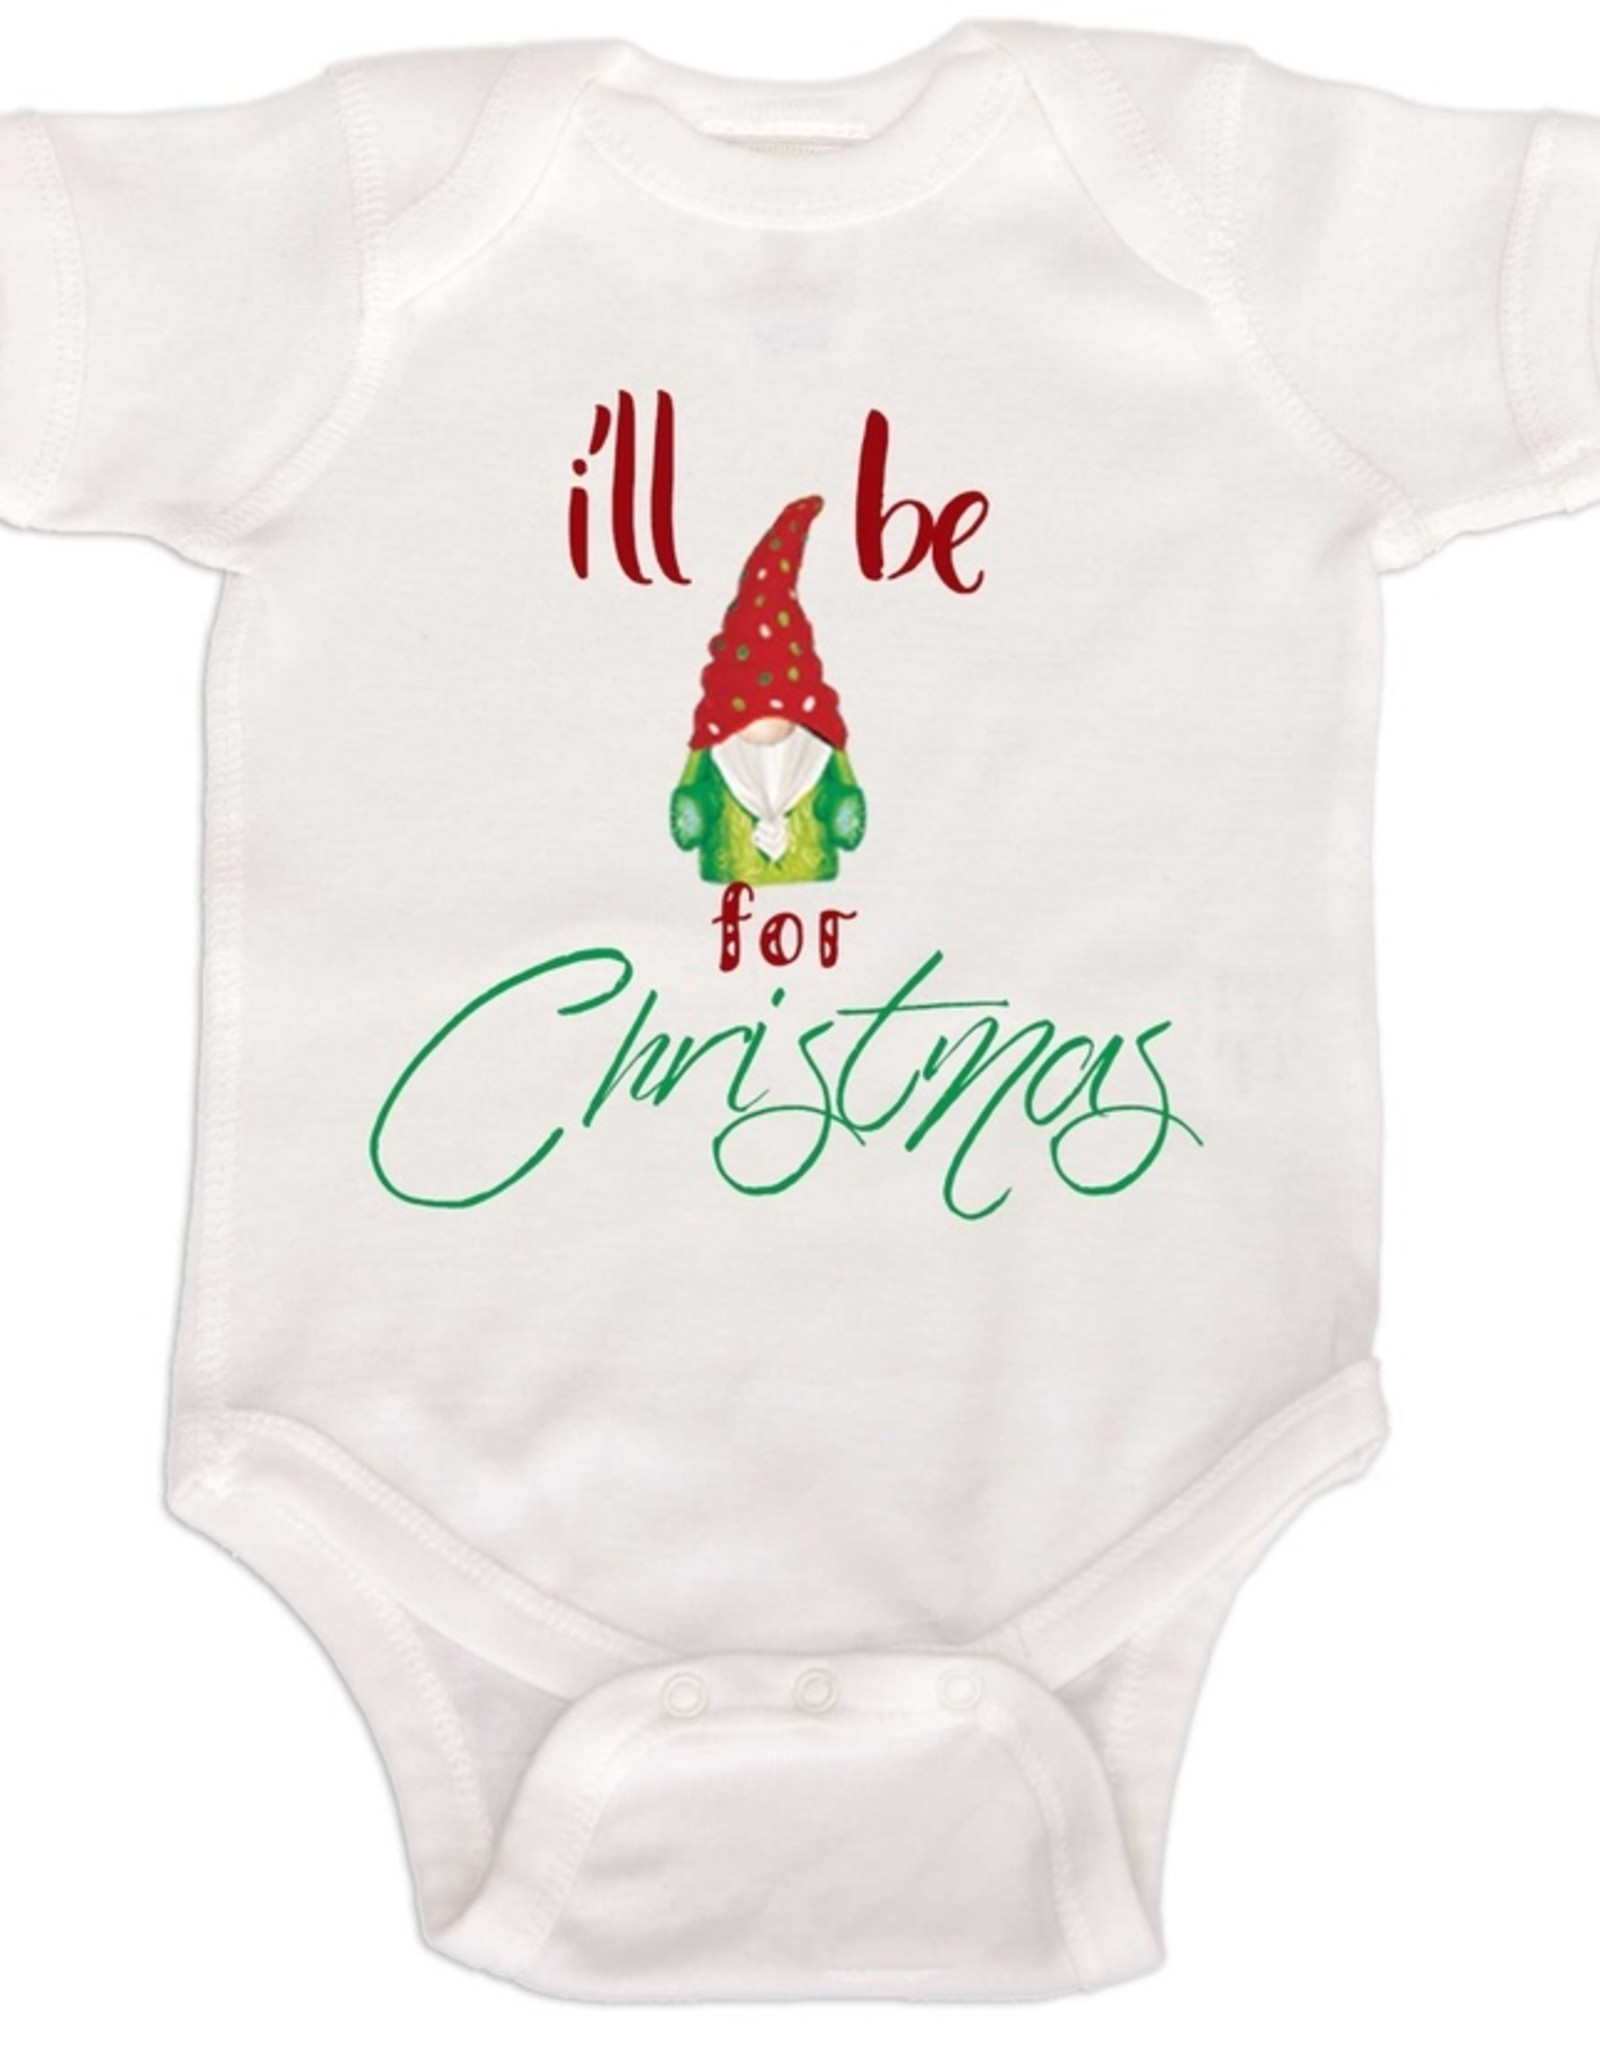 I'll be Gnome for Christmas Bodysuit Holiday Gnome